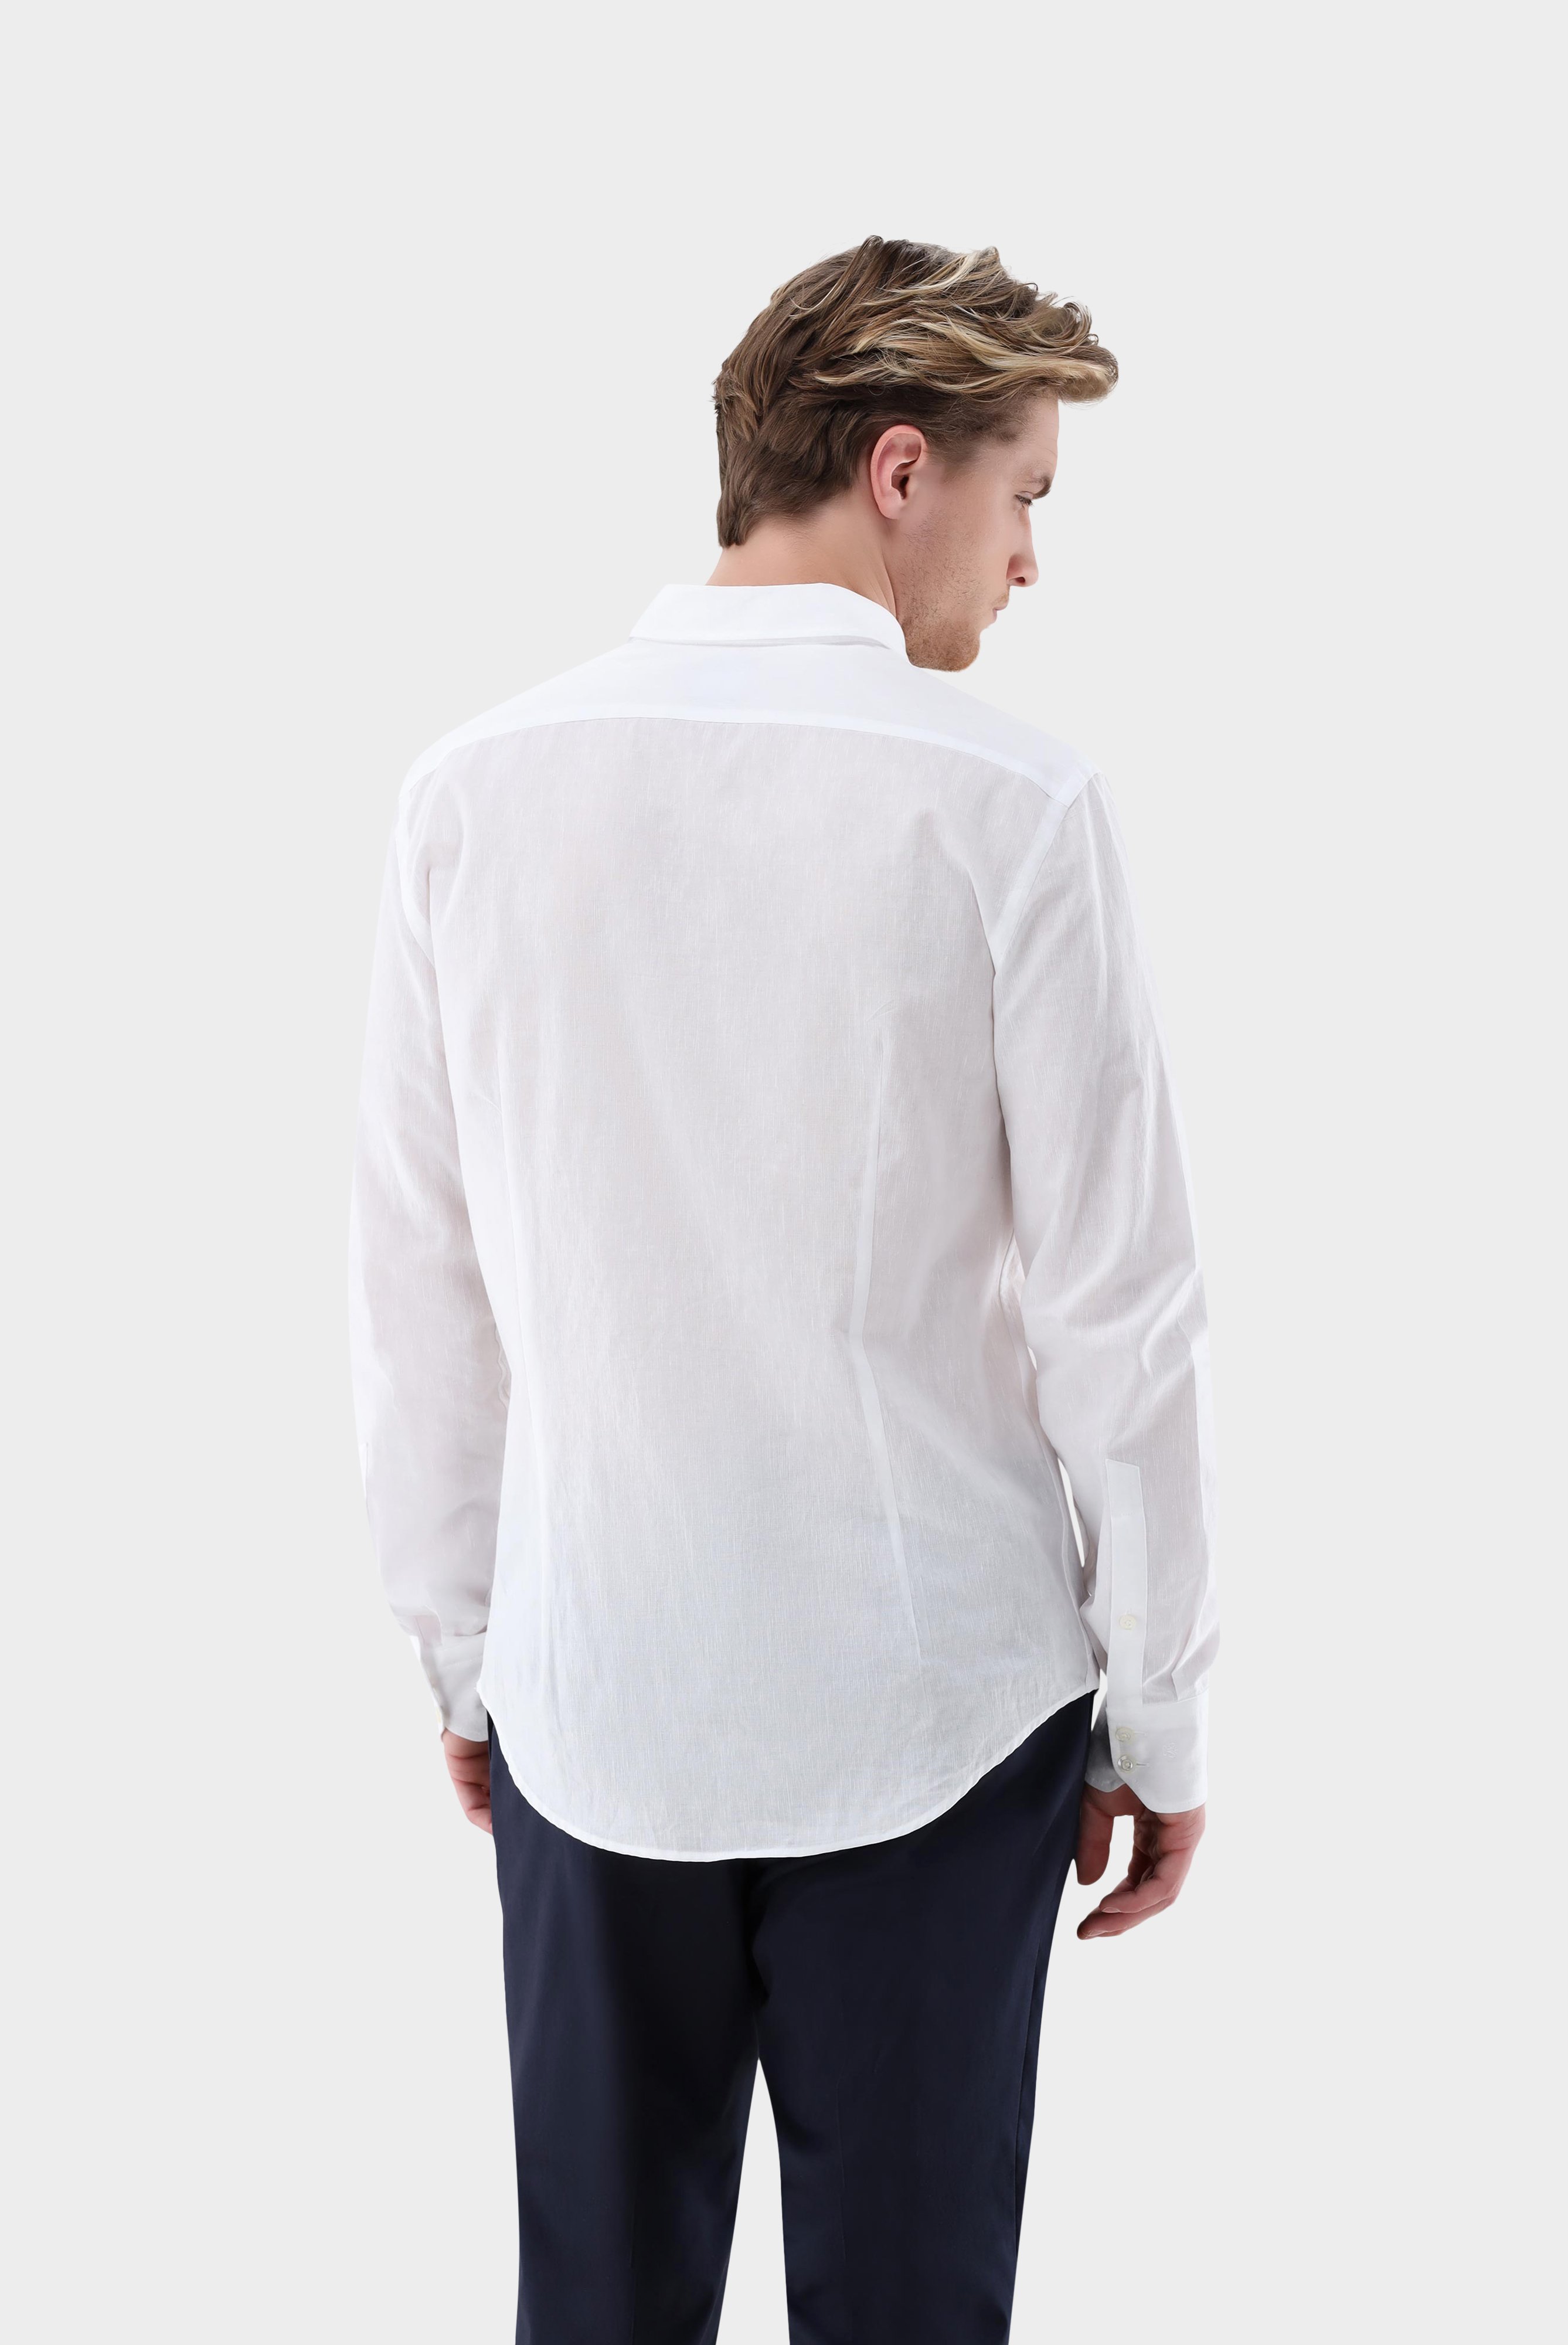 Casual Shirts+Shirt in Cotton and Linen blend Tailor Fit+20.2011.AV.151023.000.38